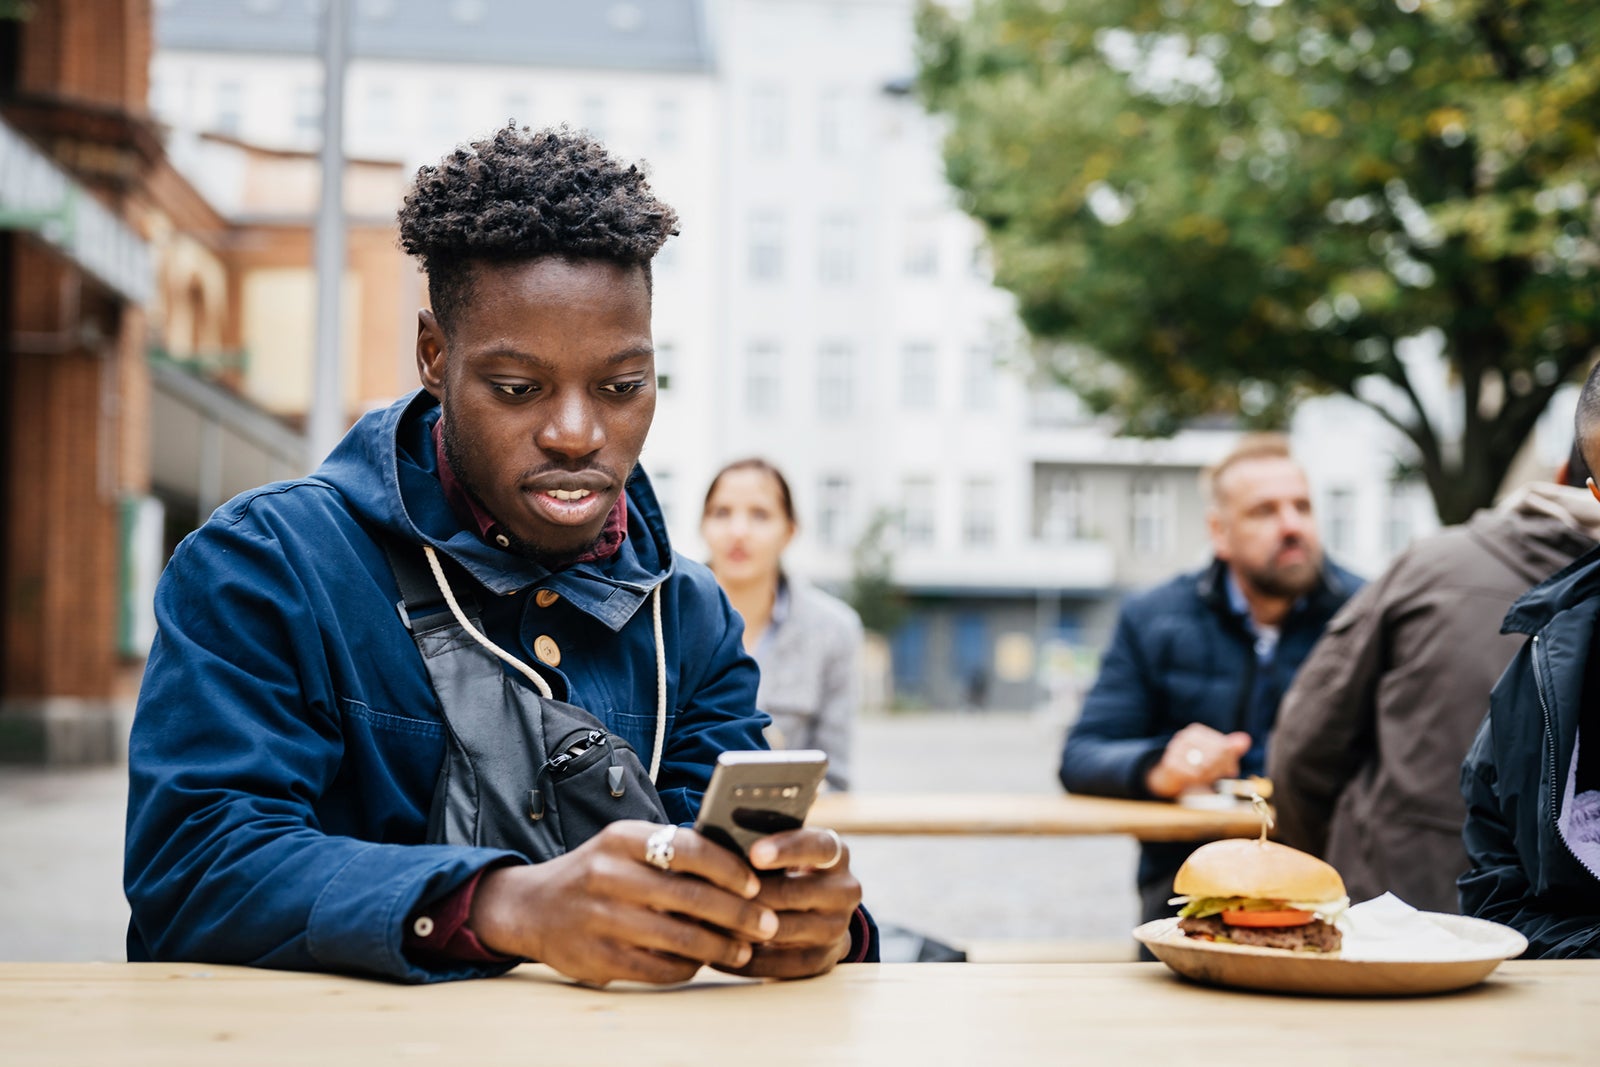 Man eating and using his smartphone